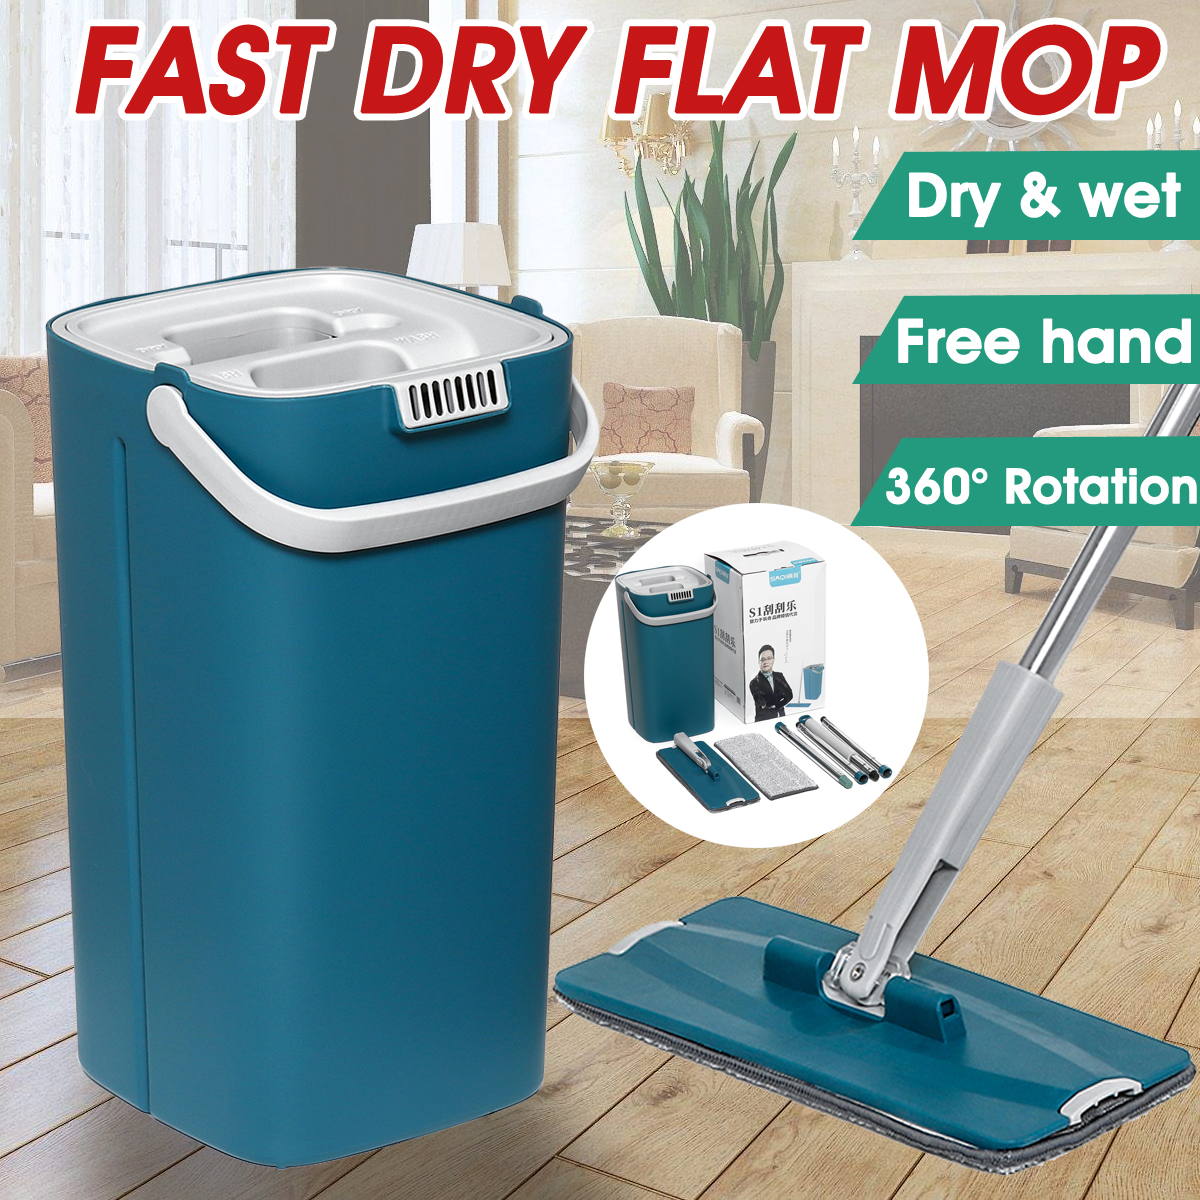 Dry-Wet-Automatic-Spin-Mop-Floor-Cleaner-Washing-Fiber-Hand-Cleaning-Dust-Fast-1588119-1